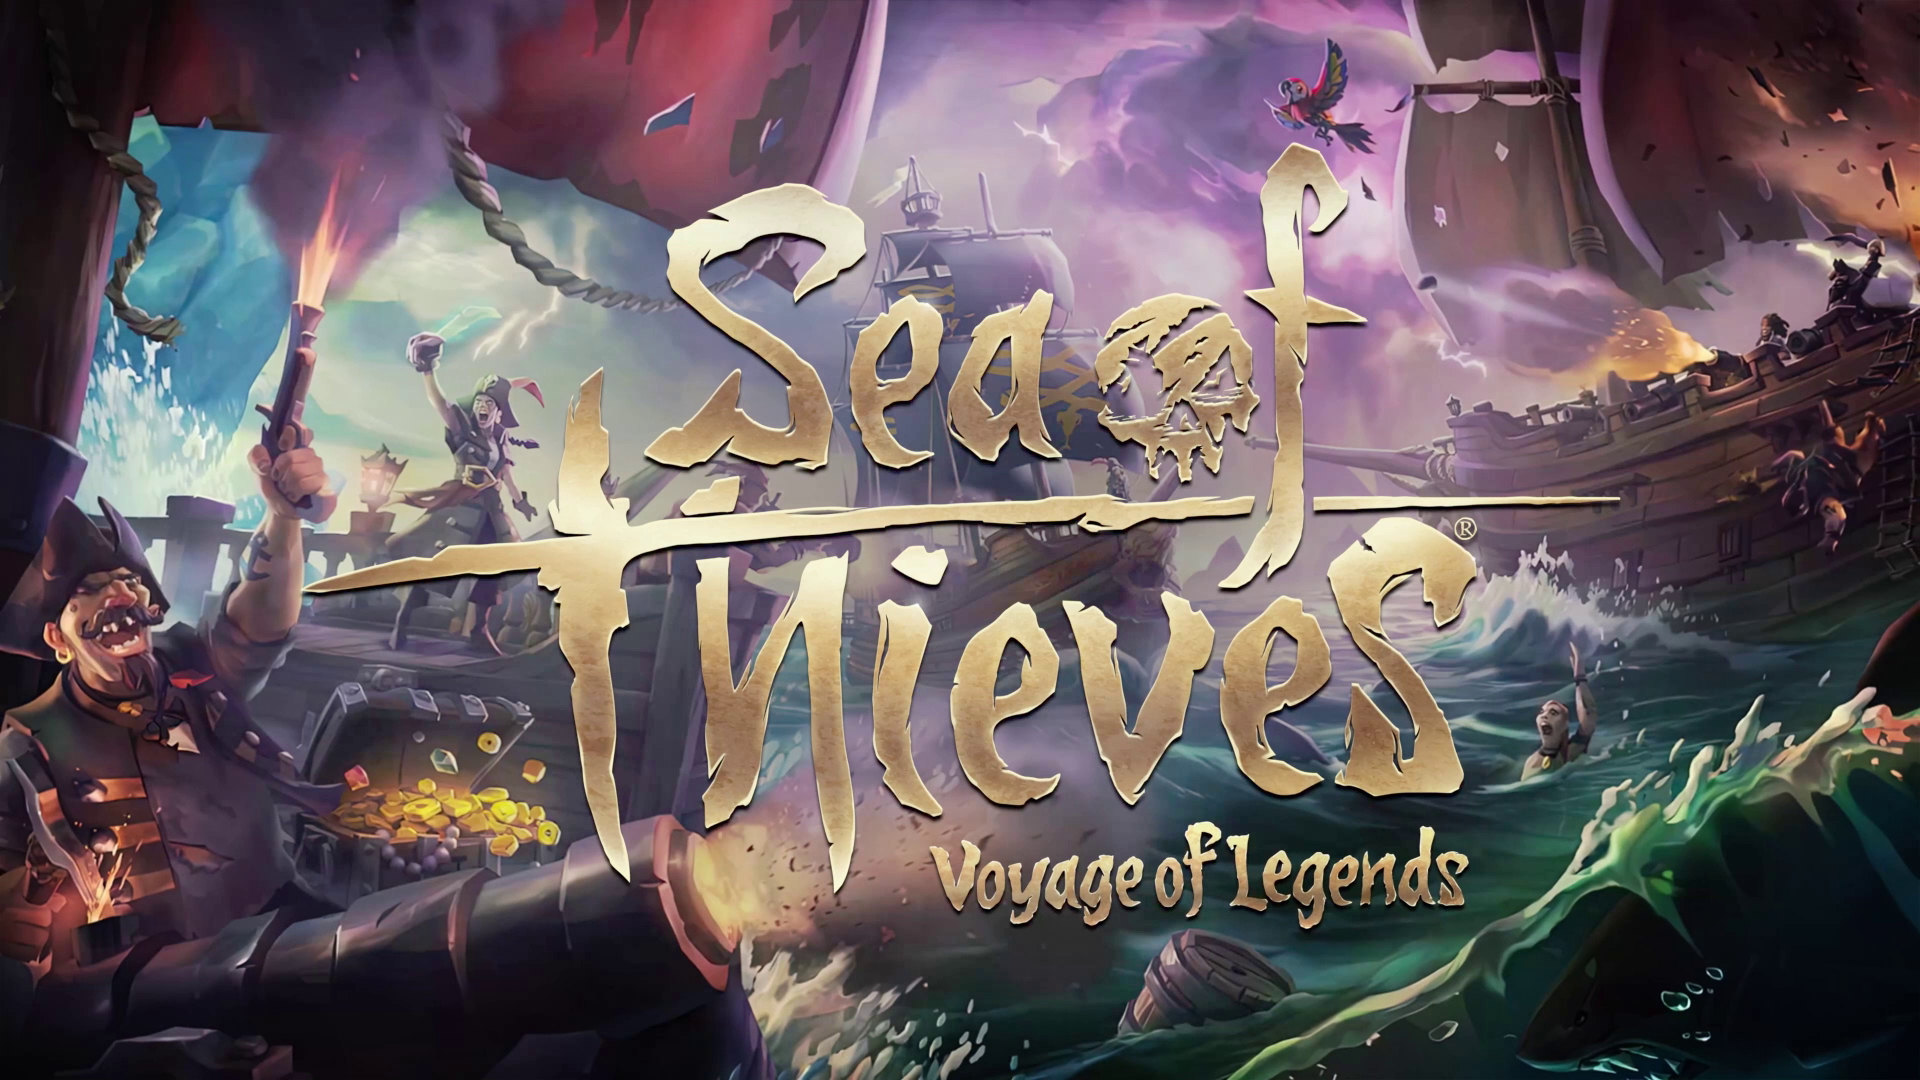 title art for Sea of Thieves: Voyage of Legends, a tabletop adaptation of the 2018 video game